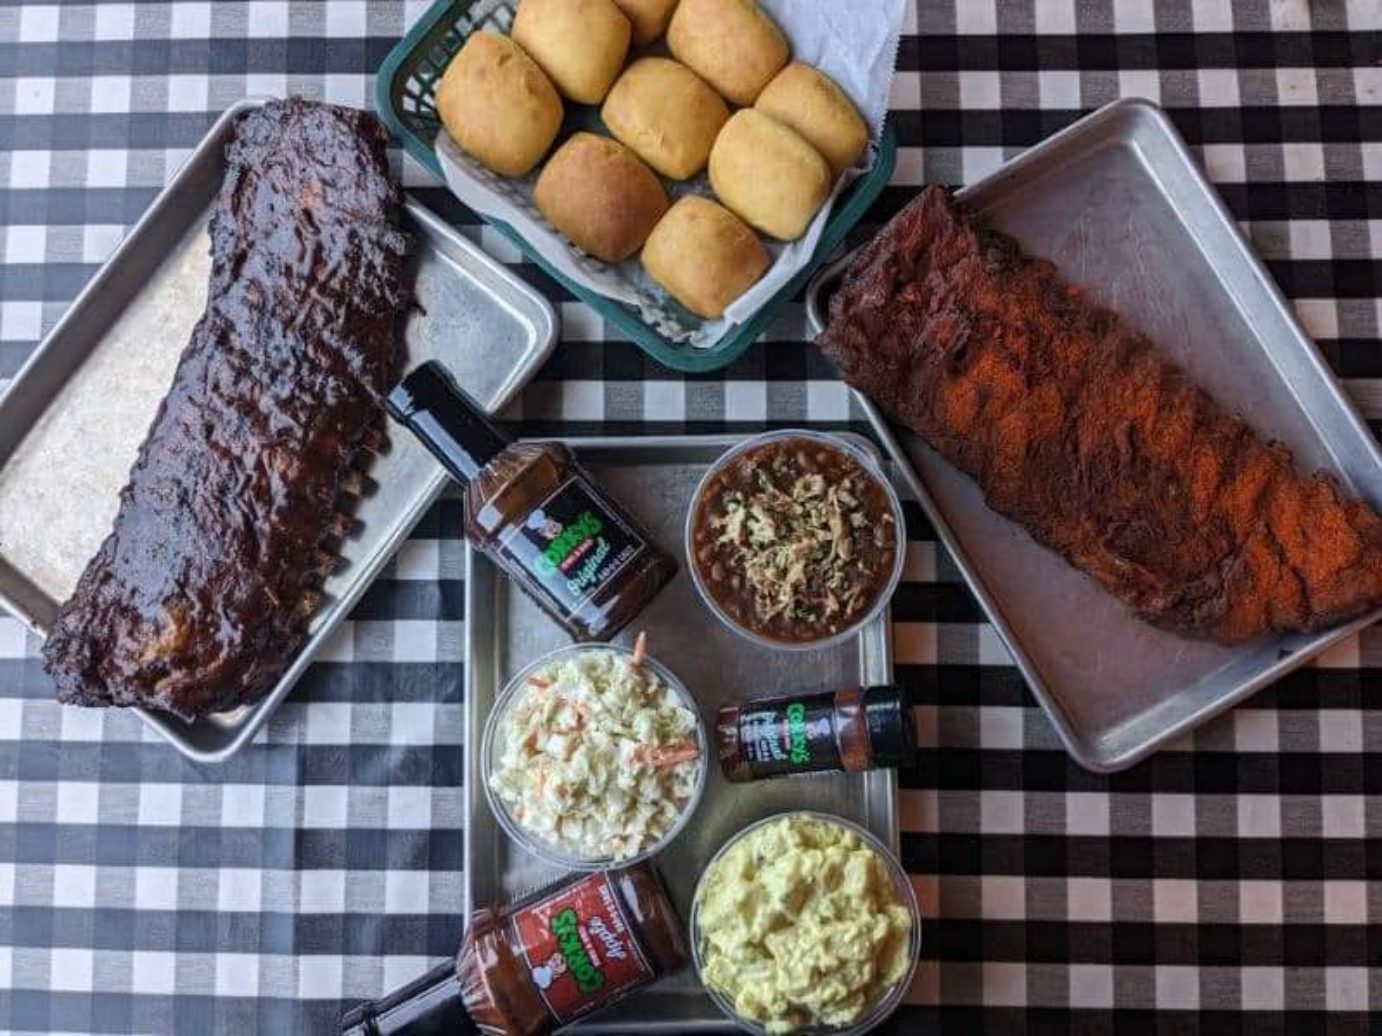 Ribs, corn bread, BBQ sauces and dips on plates.